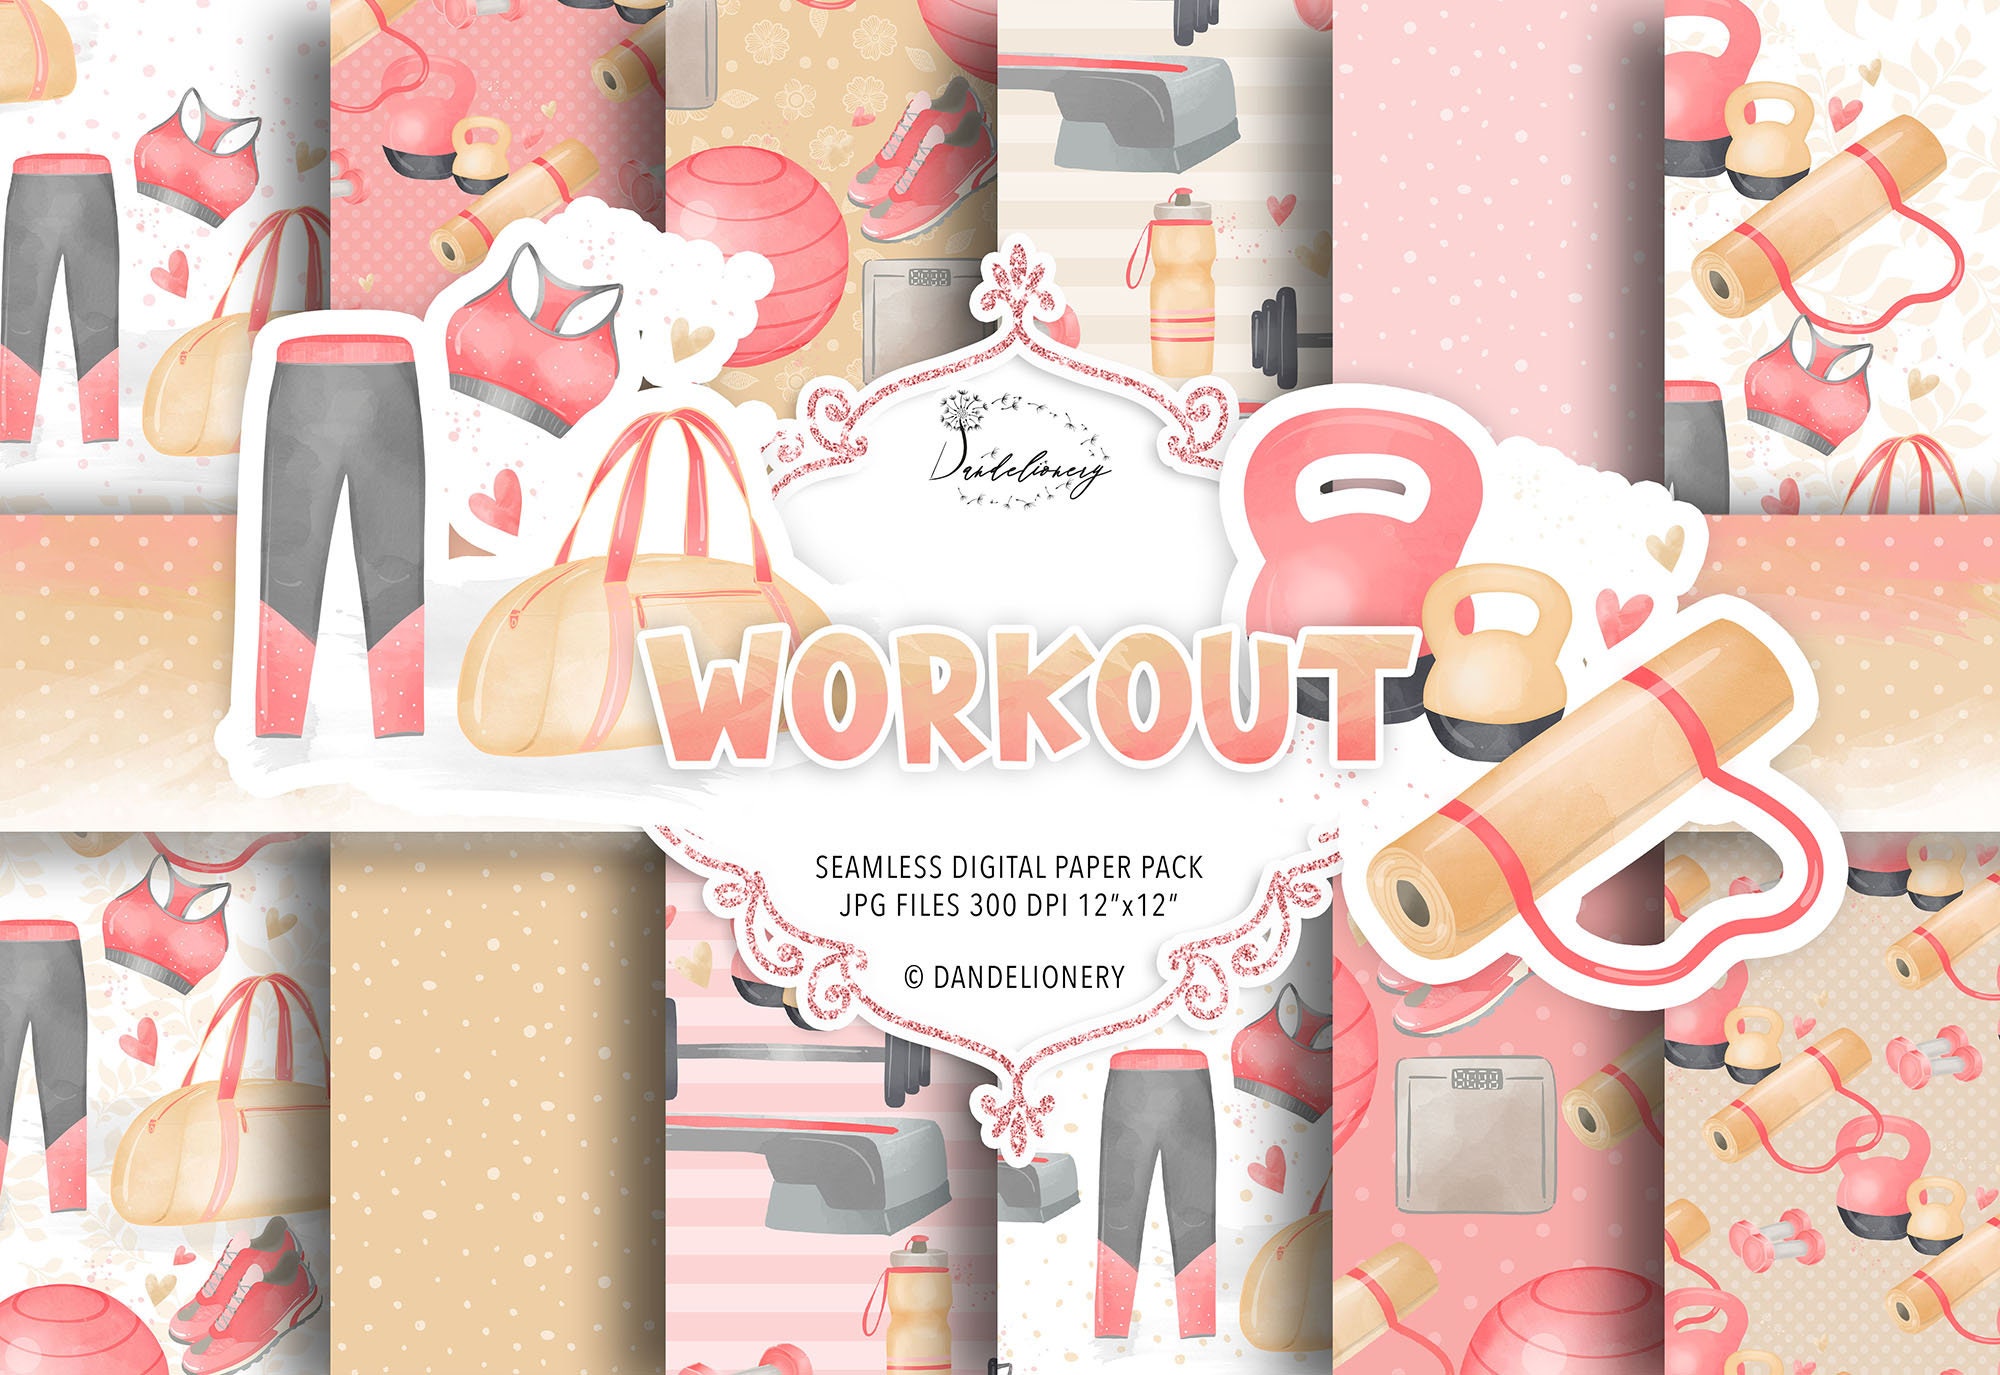 Pink Fitness Watercolour Clipart, 22 Transparent PNG 300 Dpi Cute Gym  Equipment, Pastel Exercise, Workout, Digital Download, Commercial Use 